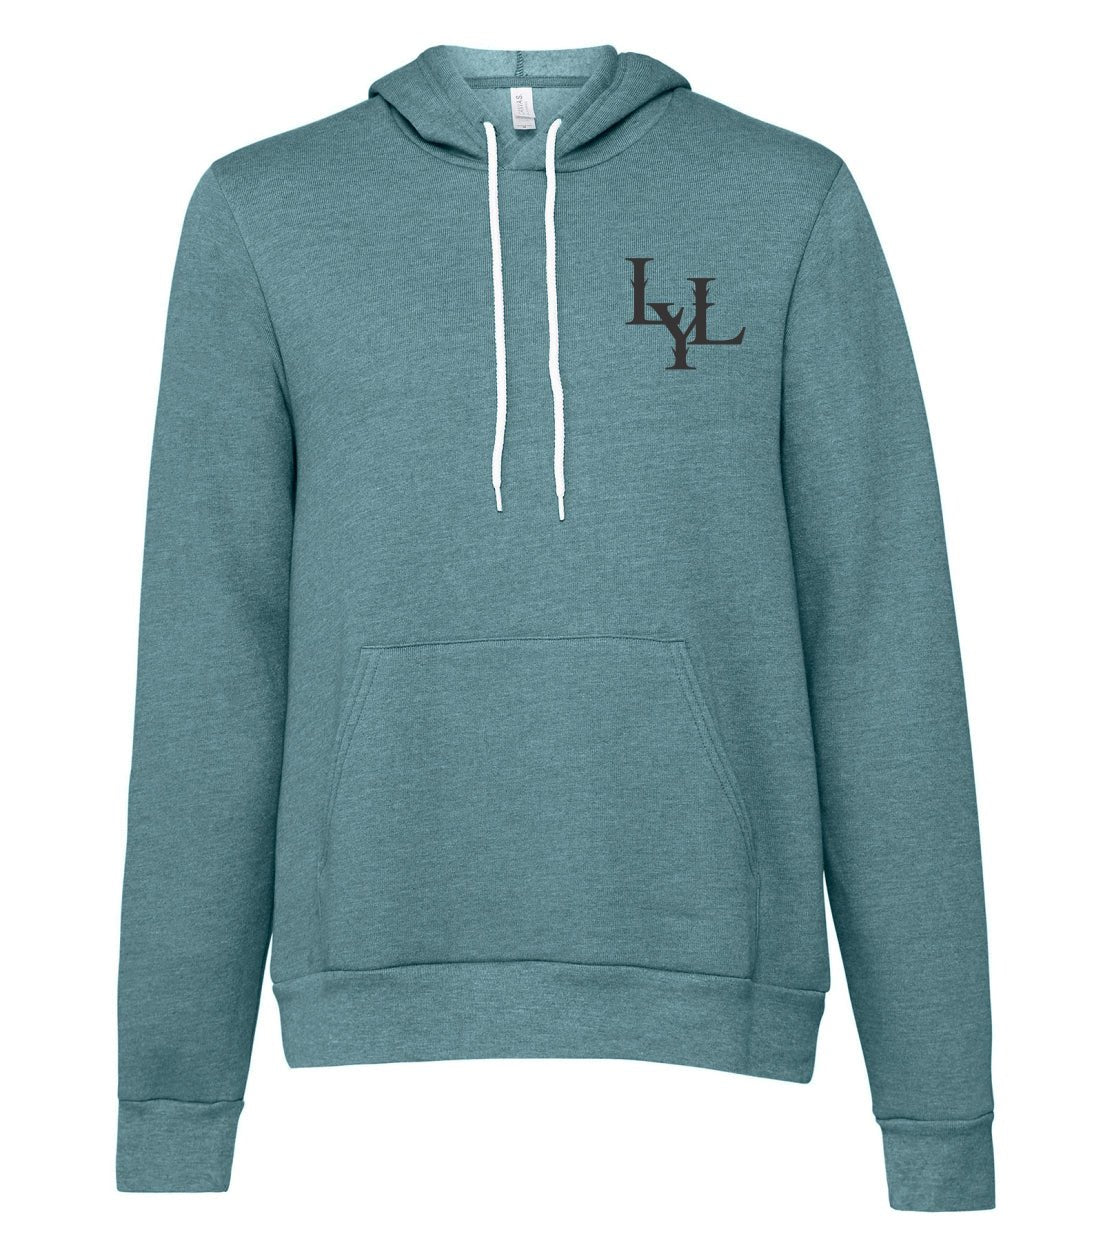 Men's LyL Hoodie - Leave Your Legacy Clothing